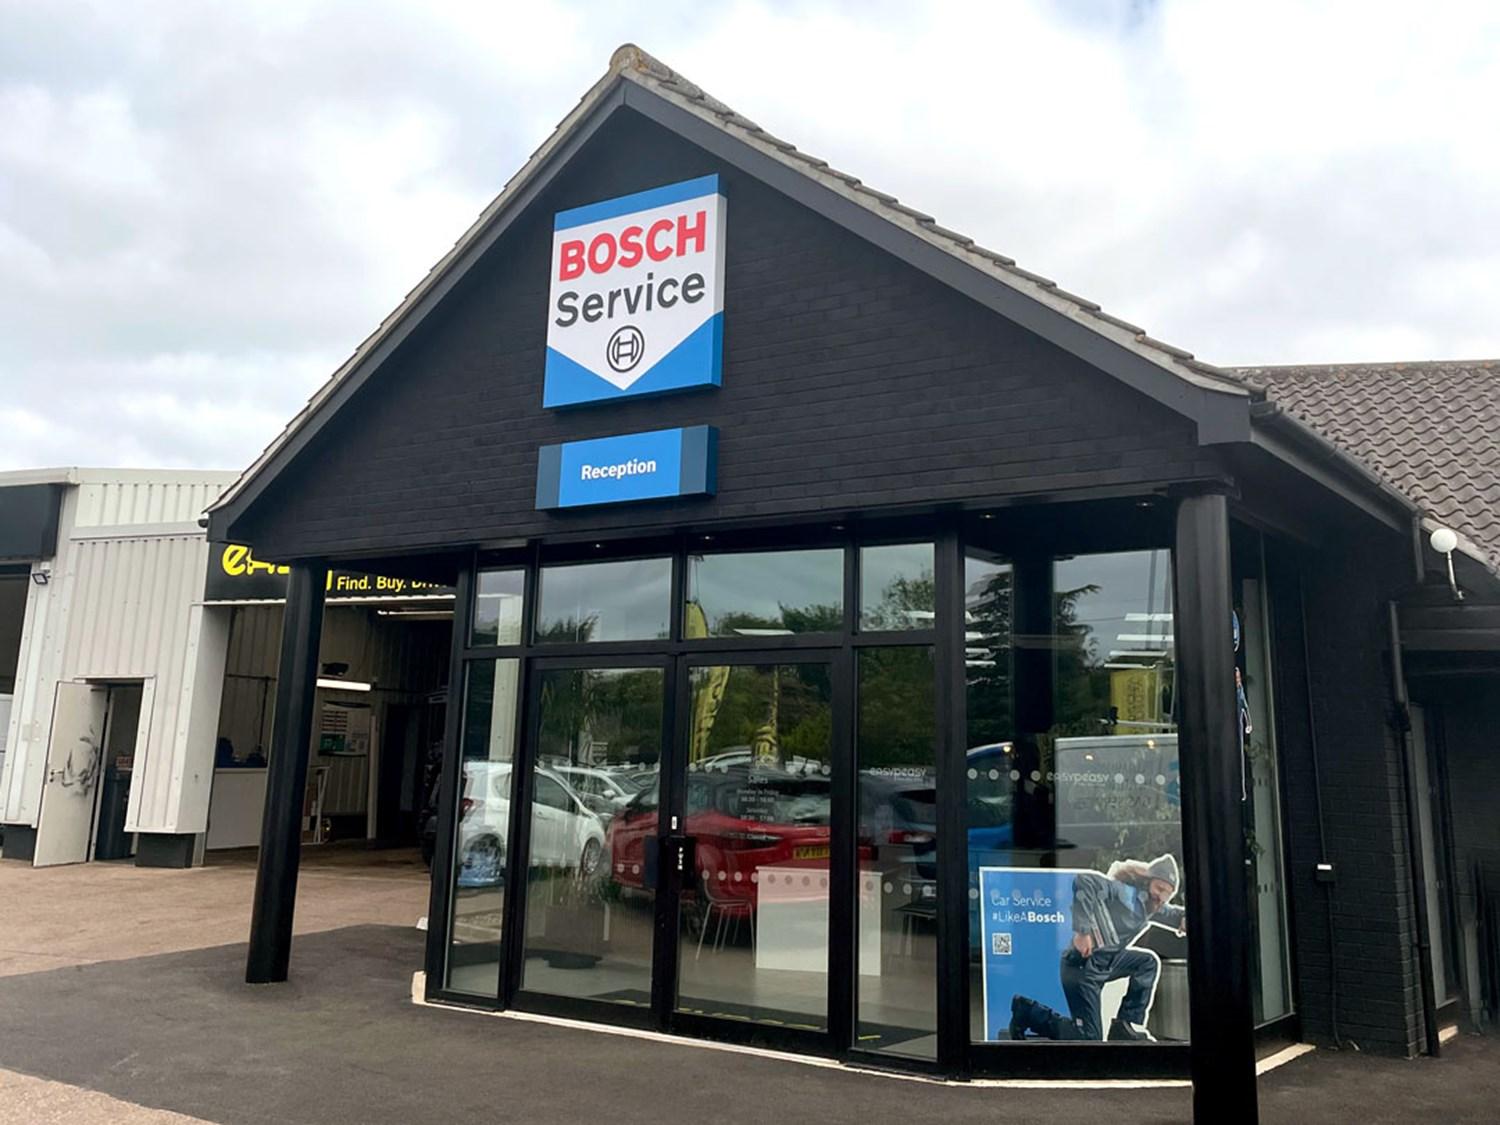 Exterior view of our state-of-the-art car service center located at easypeasy norwich. Expert technicians and modern facilities ensure top-quality automotive care for your car